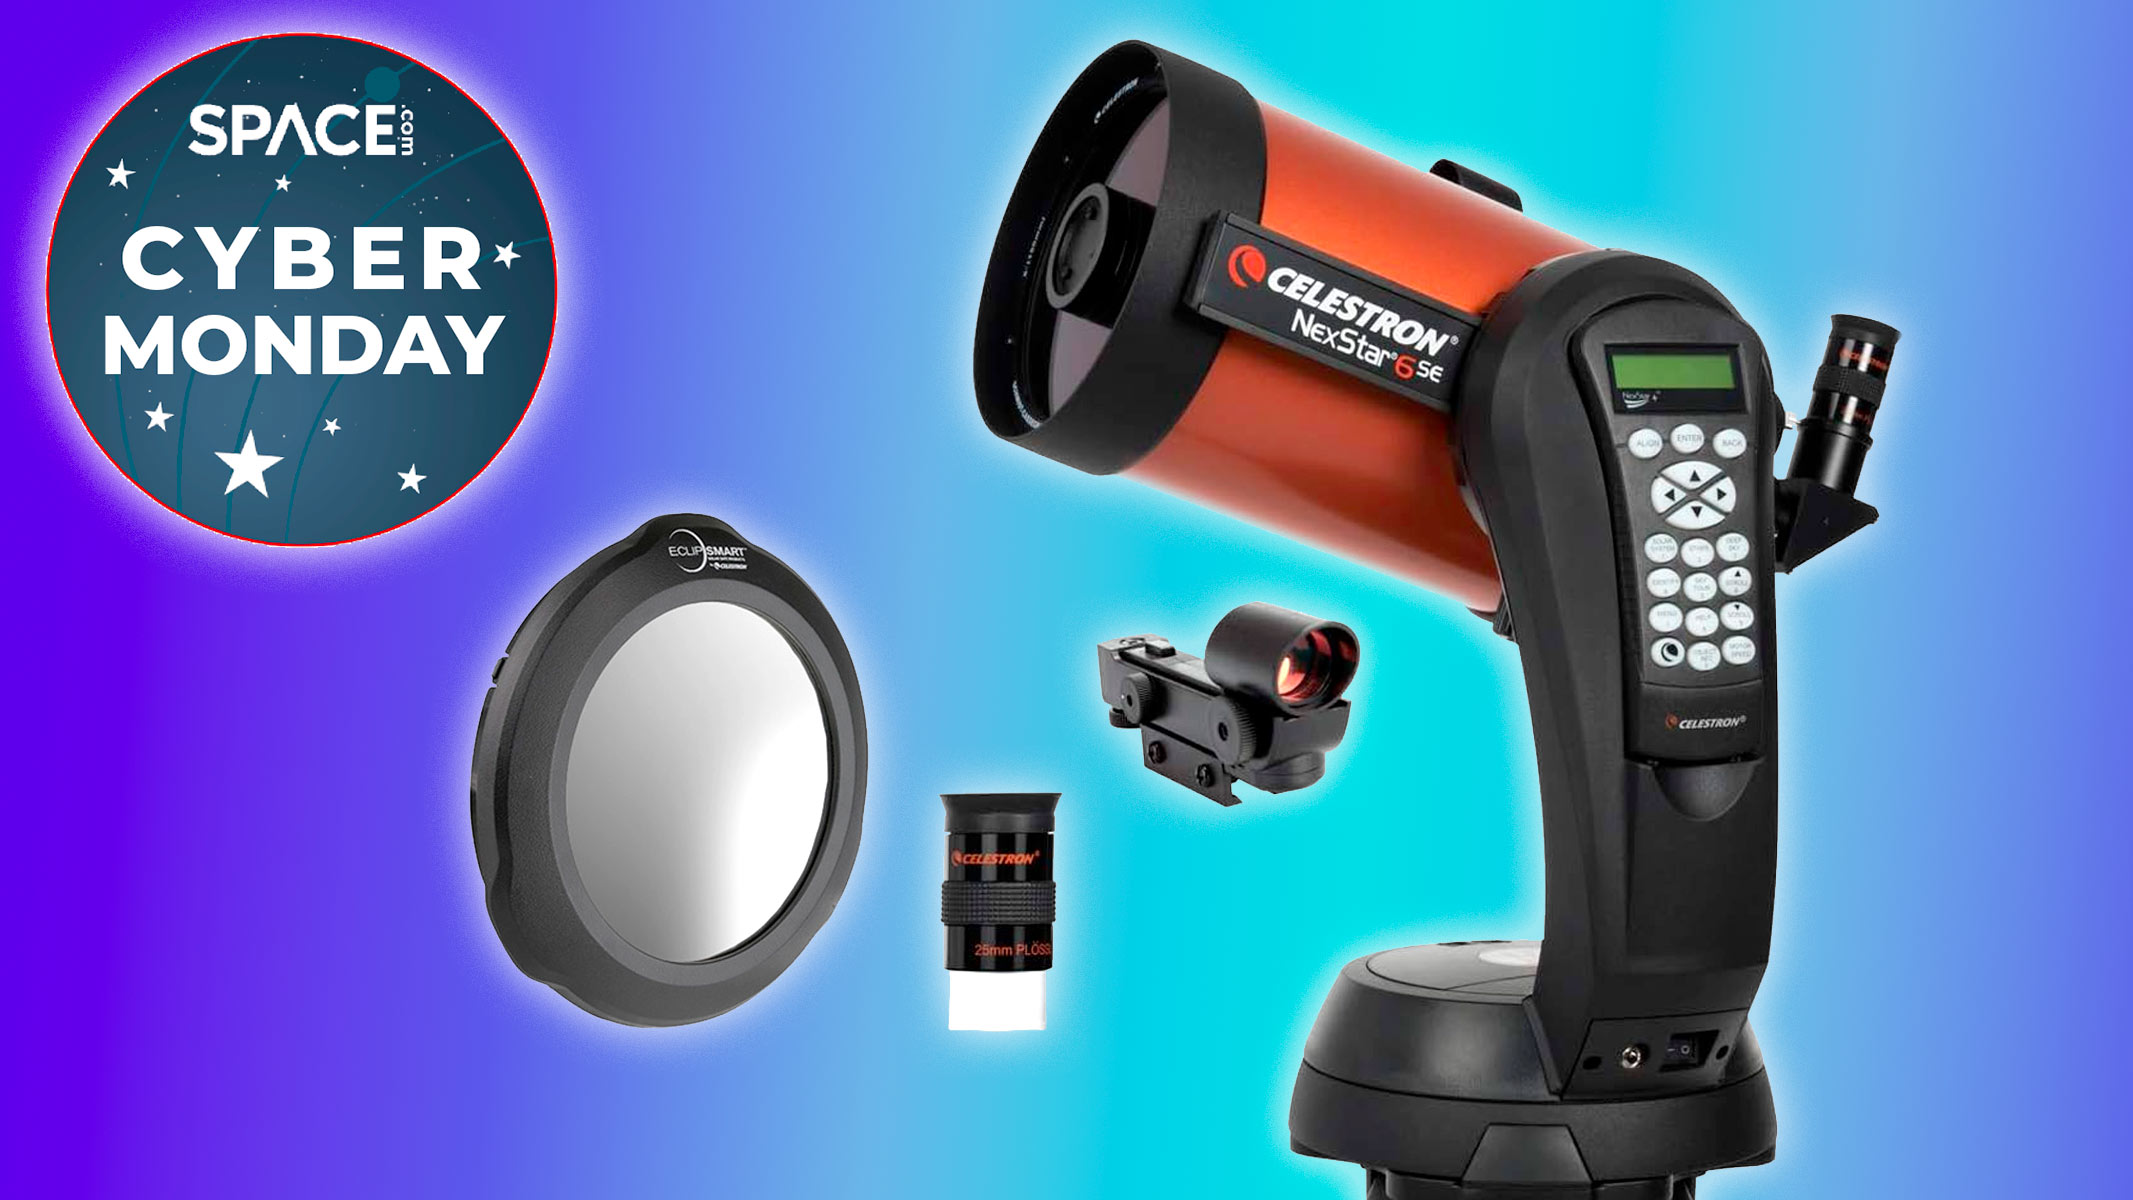 Cyber Monday telescope deal: Save over $1000 on this telescope and solar filter bundle for more than 50% off Space